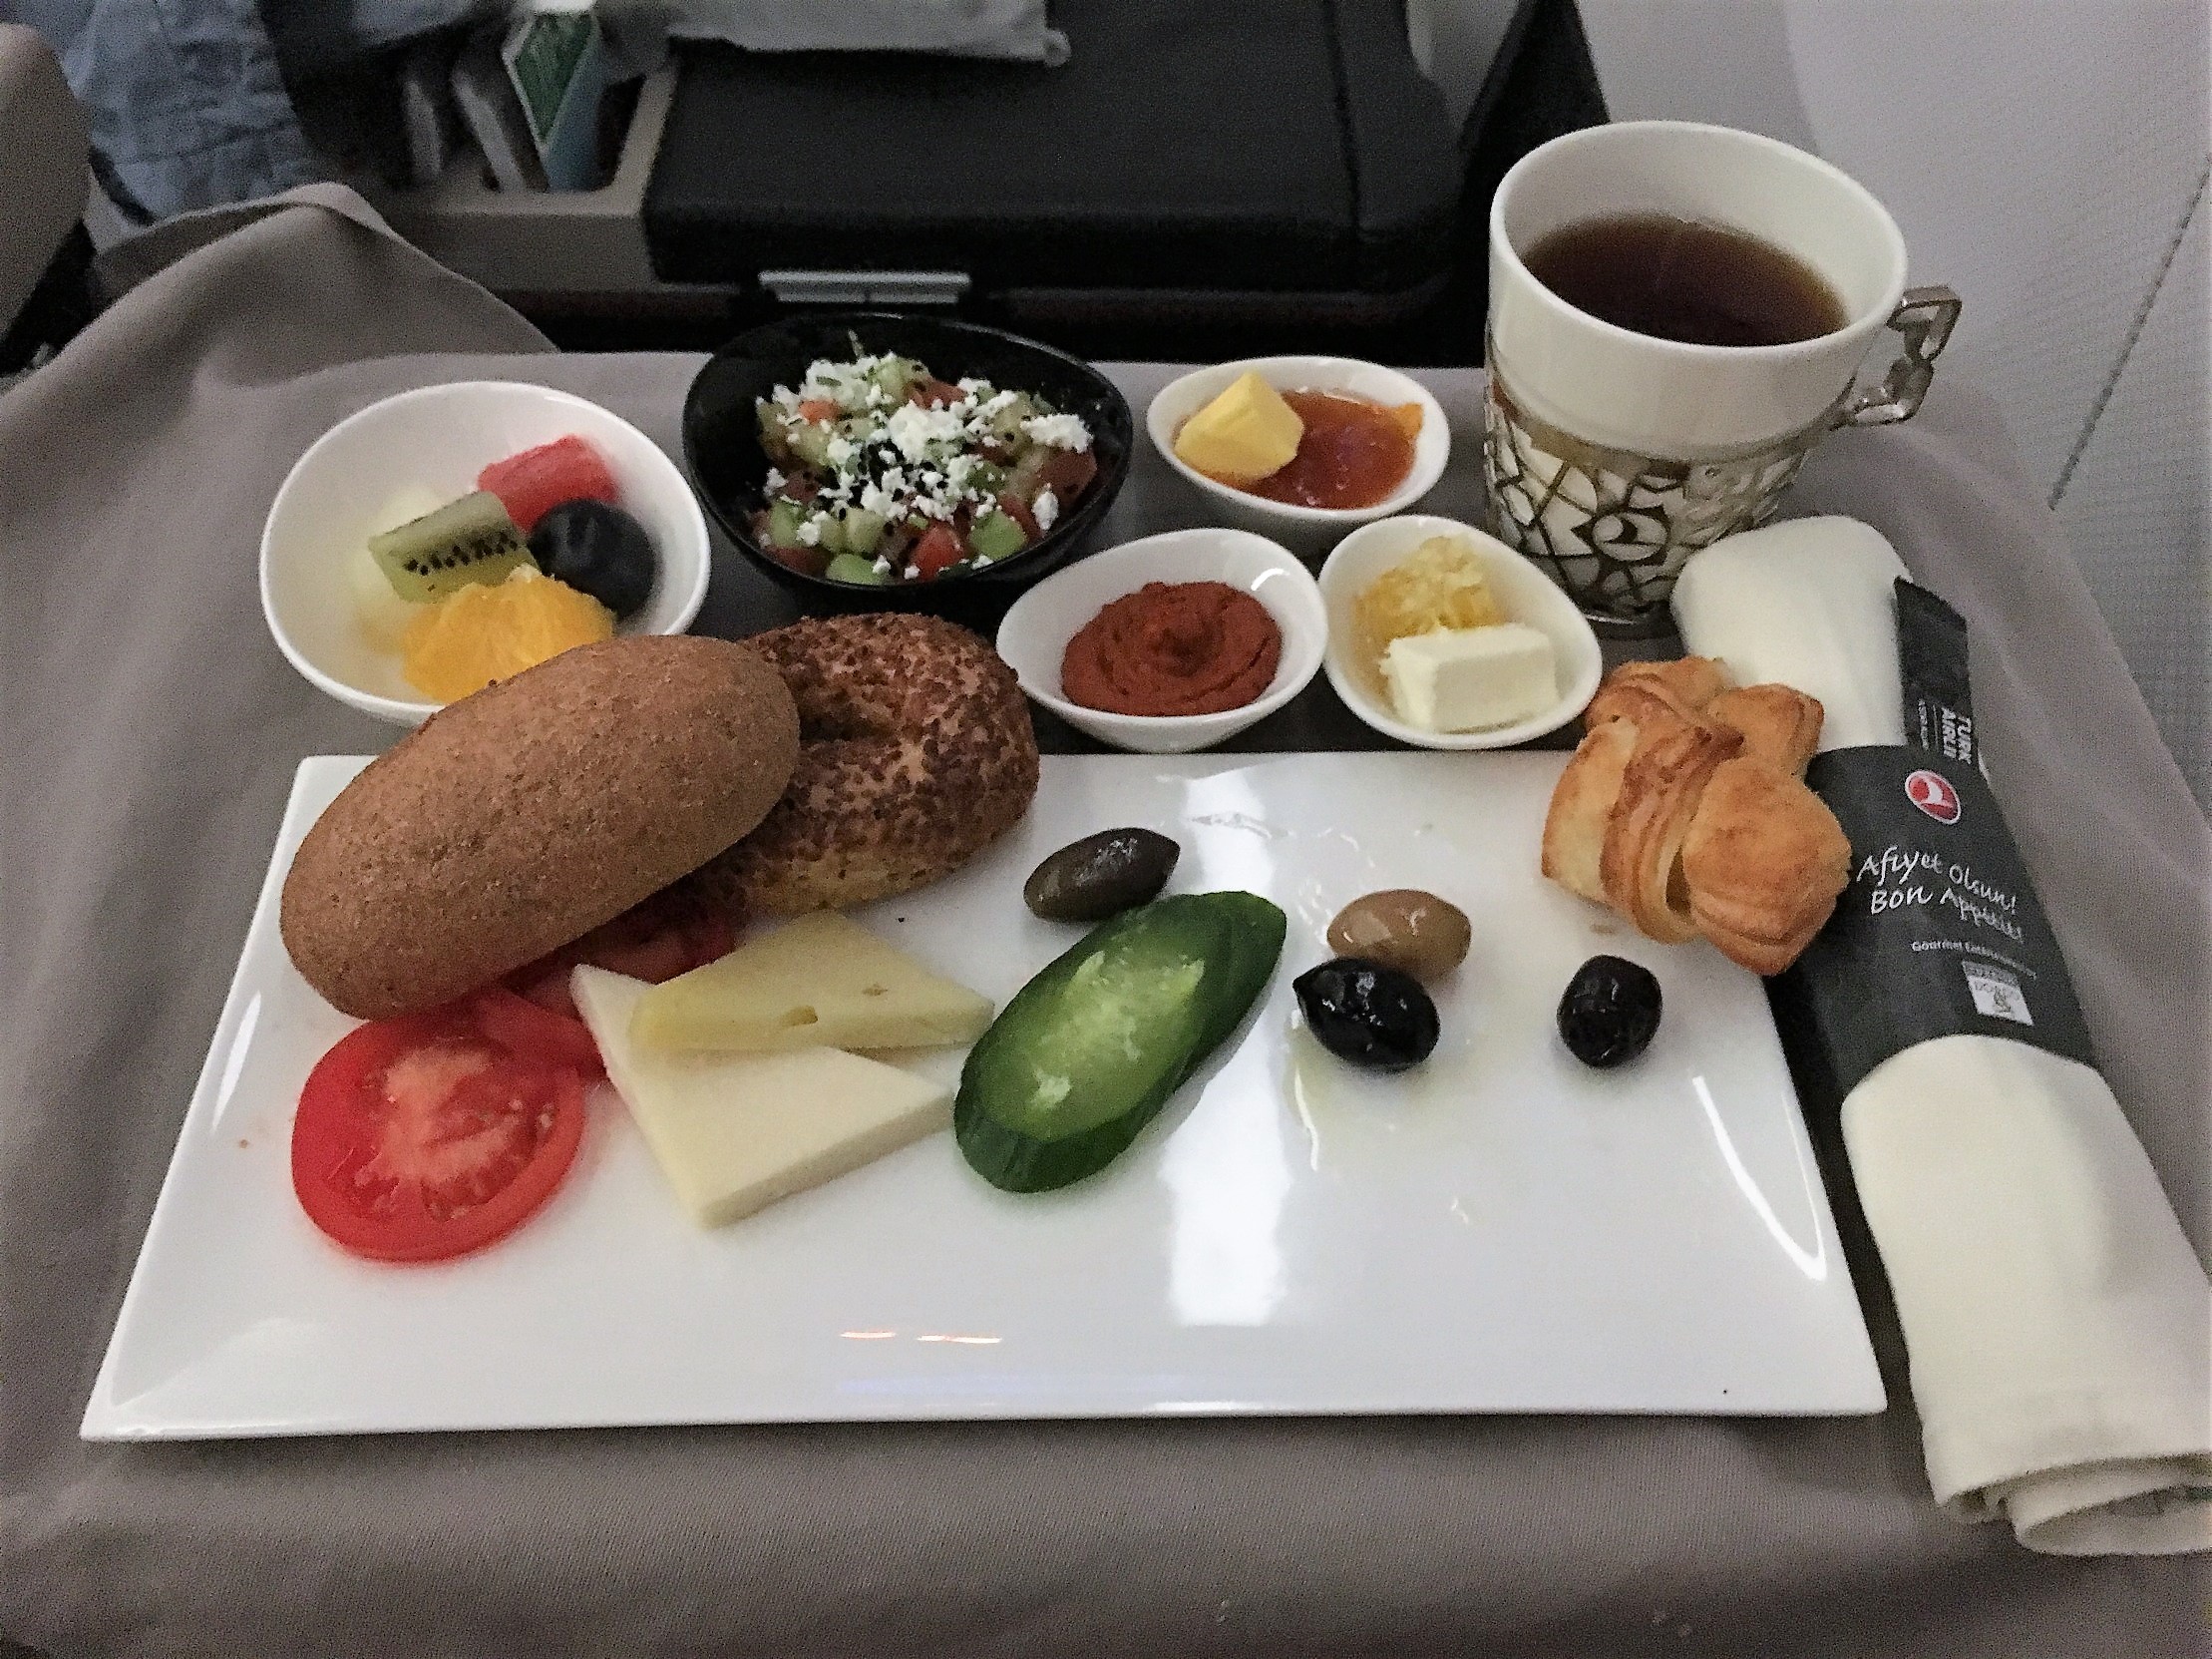 Turkish Airlines Inflight Meal (Istanbul-Seoul)